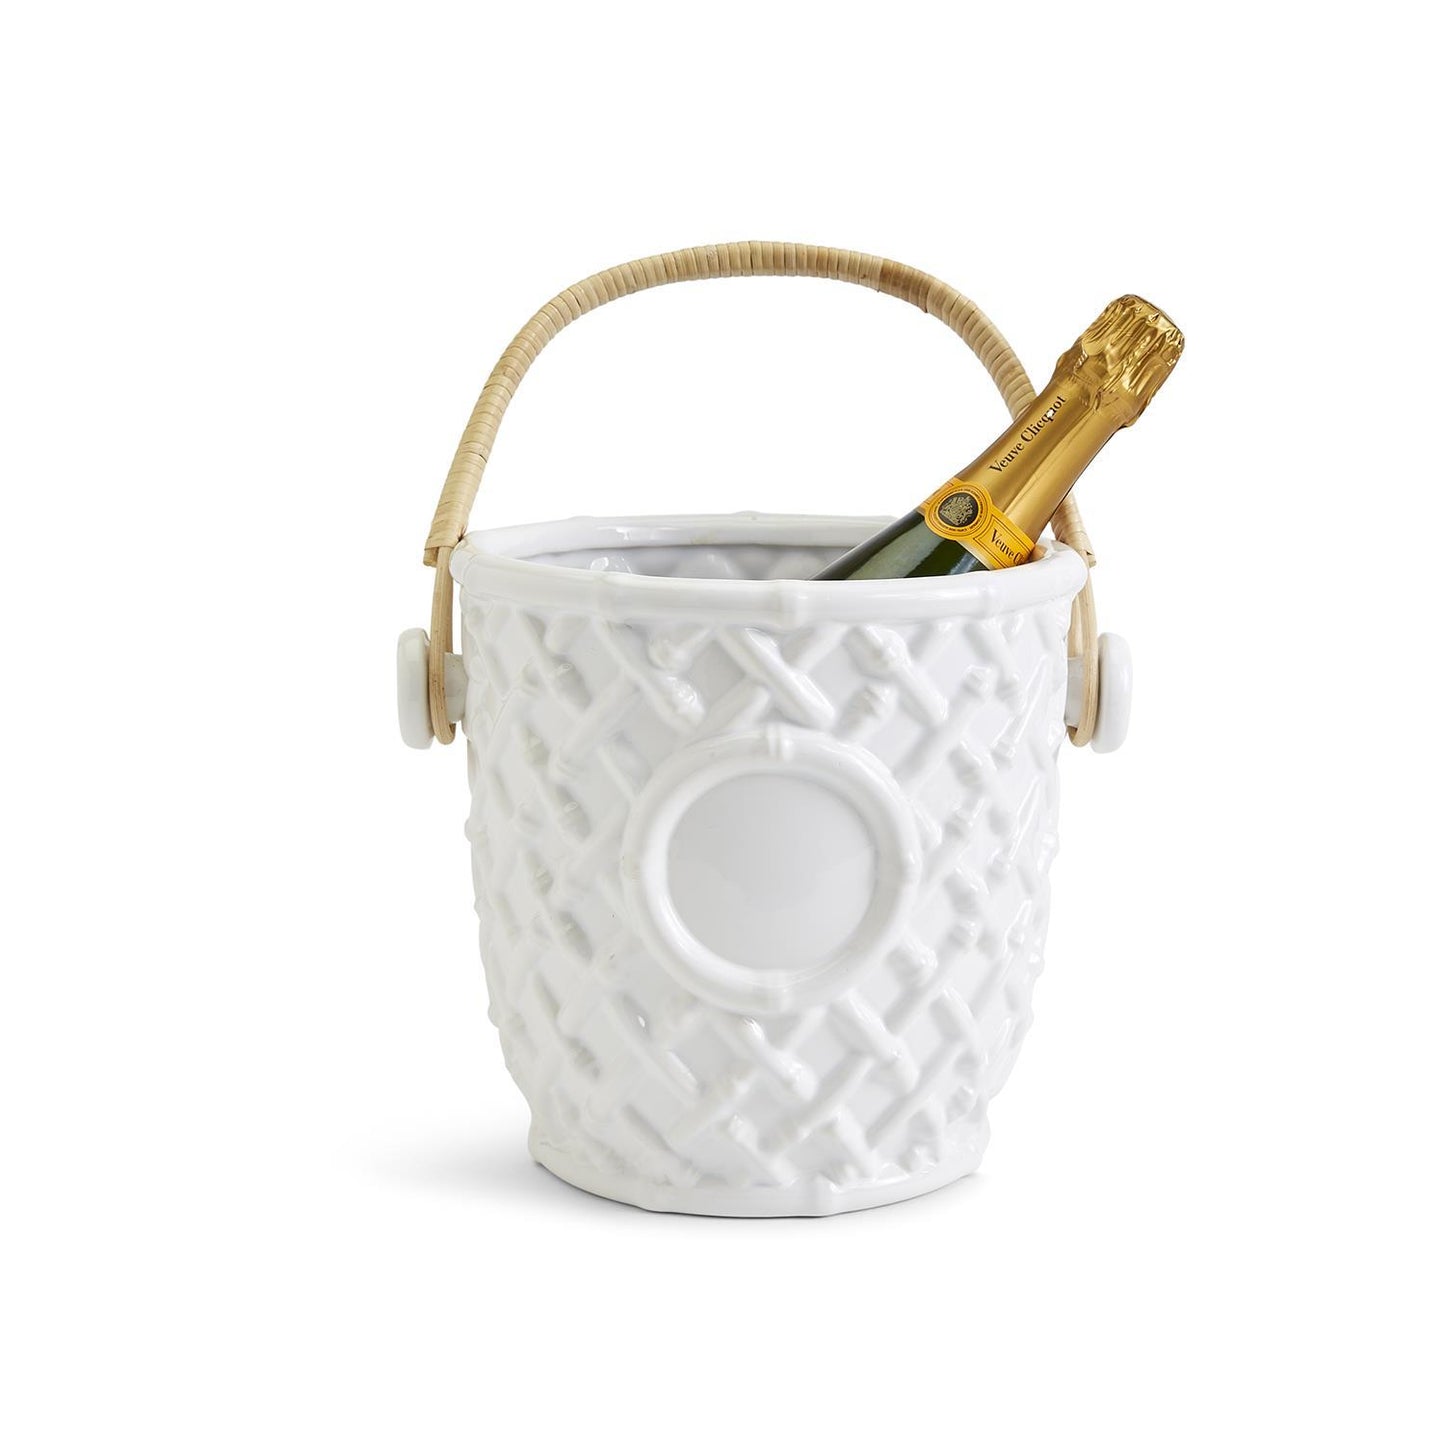 Hampton Faux Bamboo Fretwork Champagne/Wine Bucket with Bamboo Handle Gifts Two's Company   